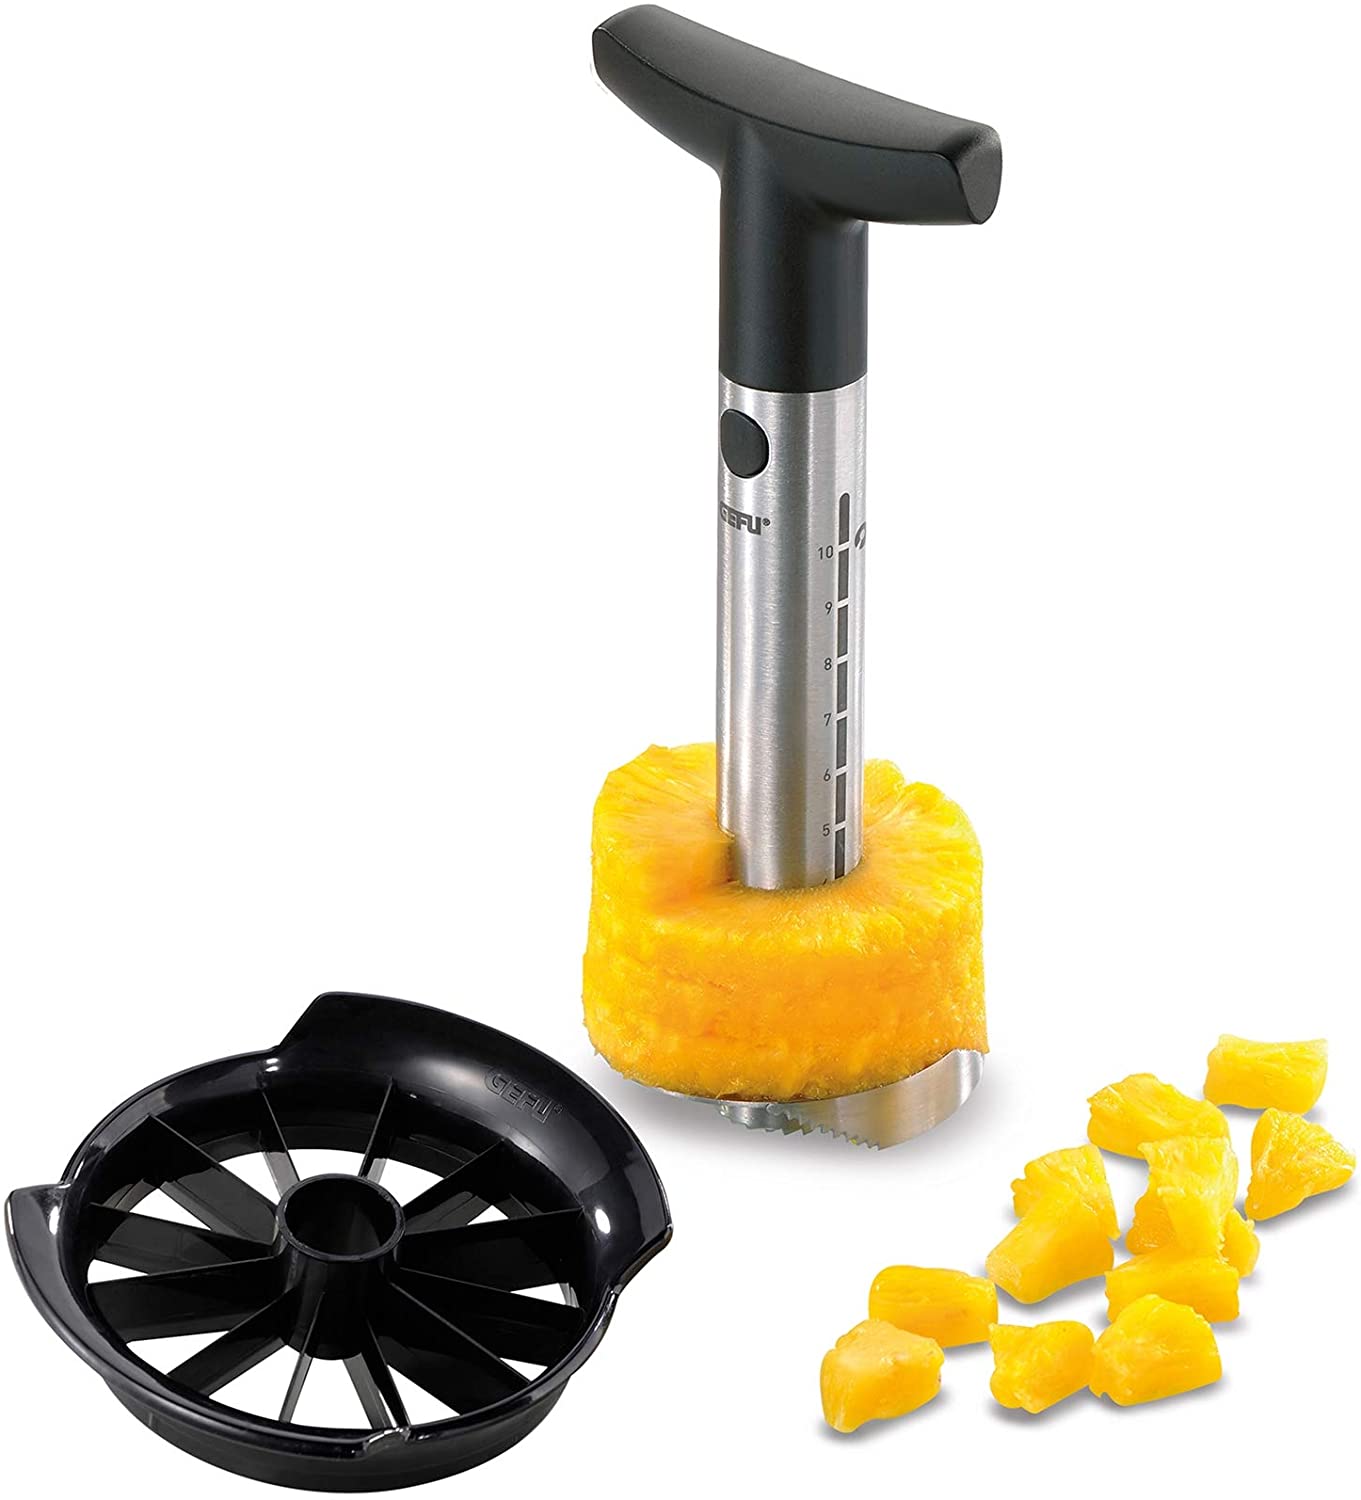 Gefu Professional Pineapple Slicer with chips Cutter 85 mm Diameter 89327